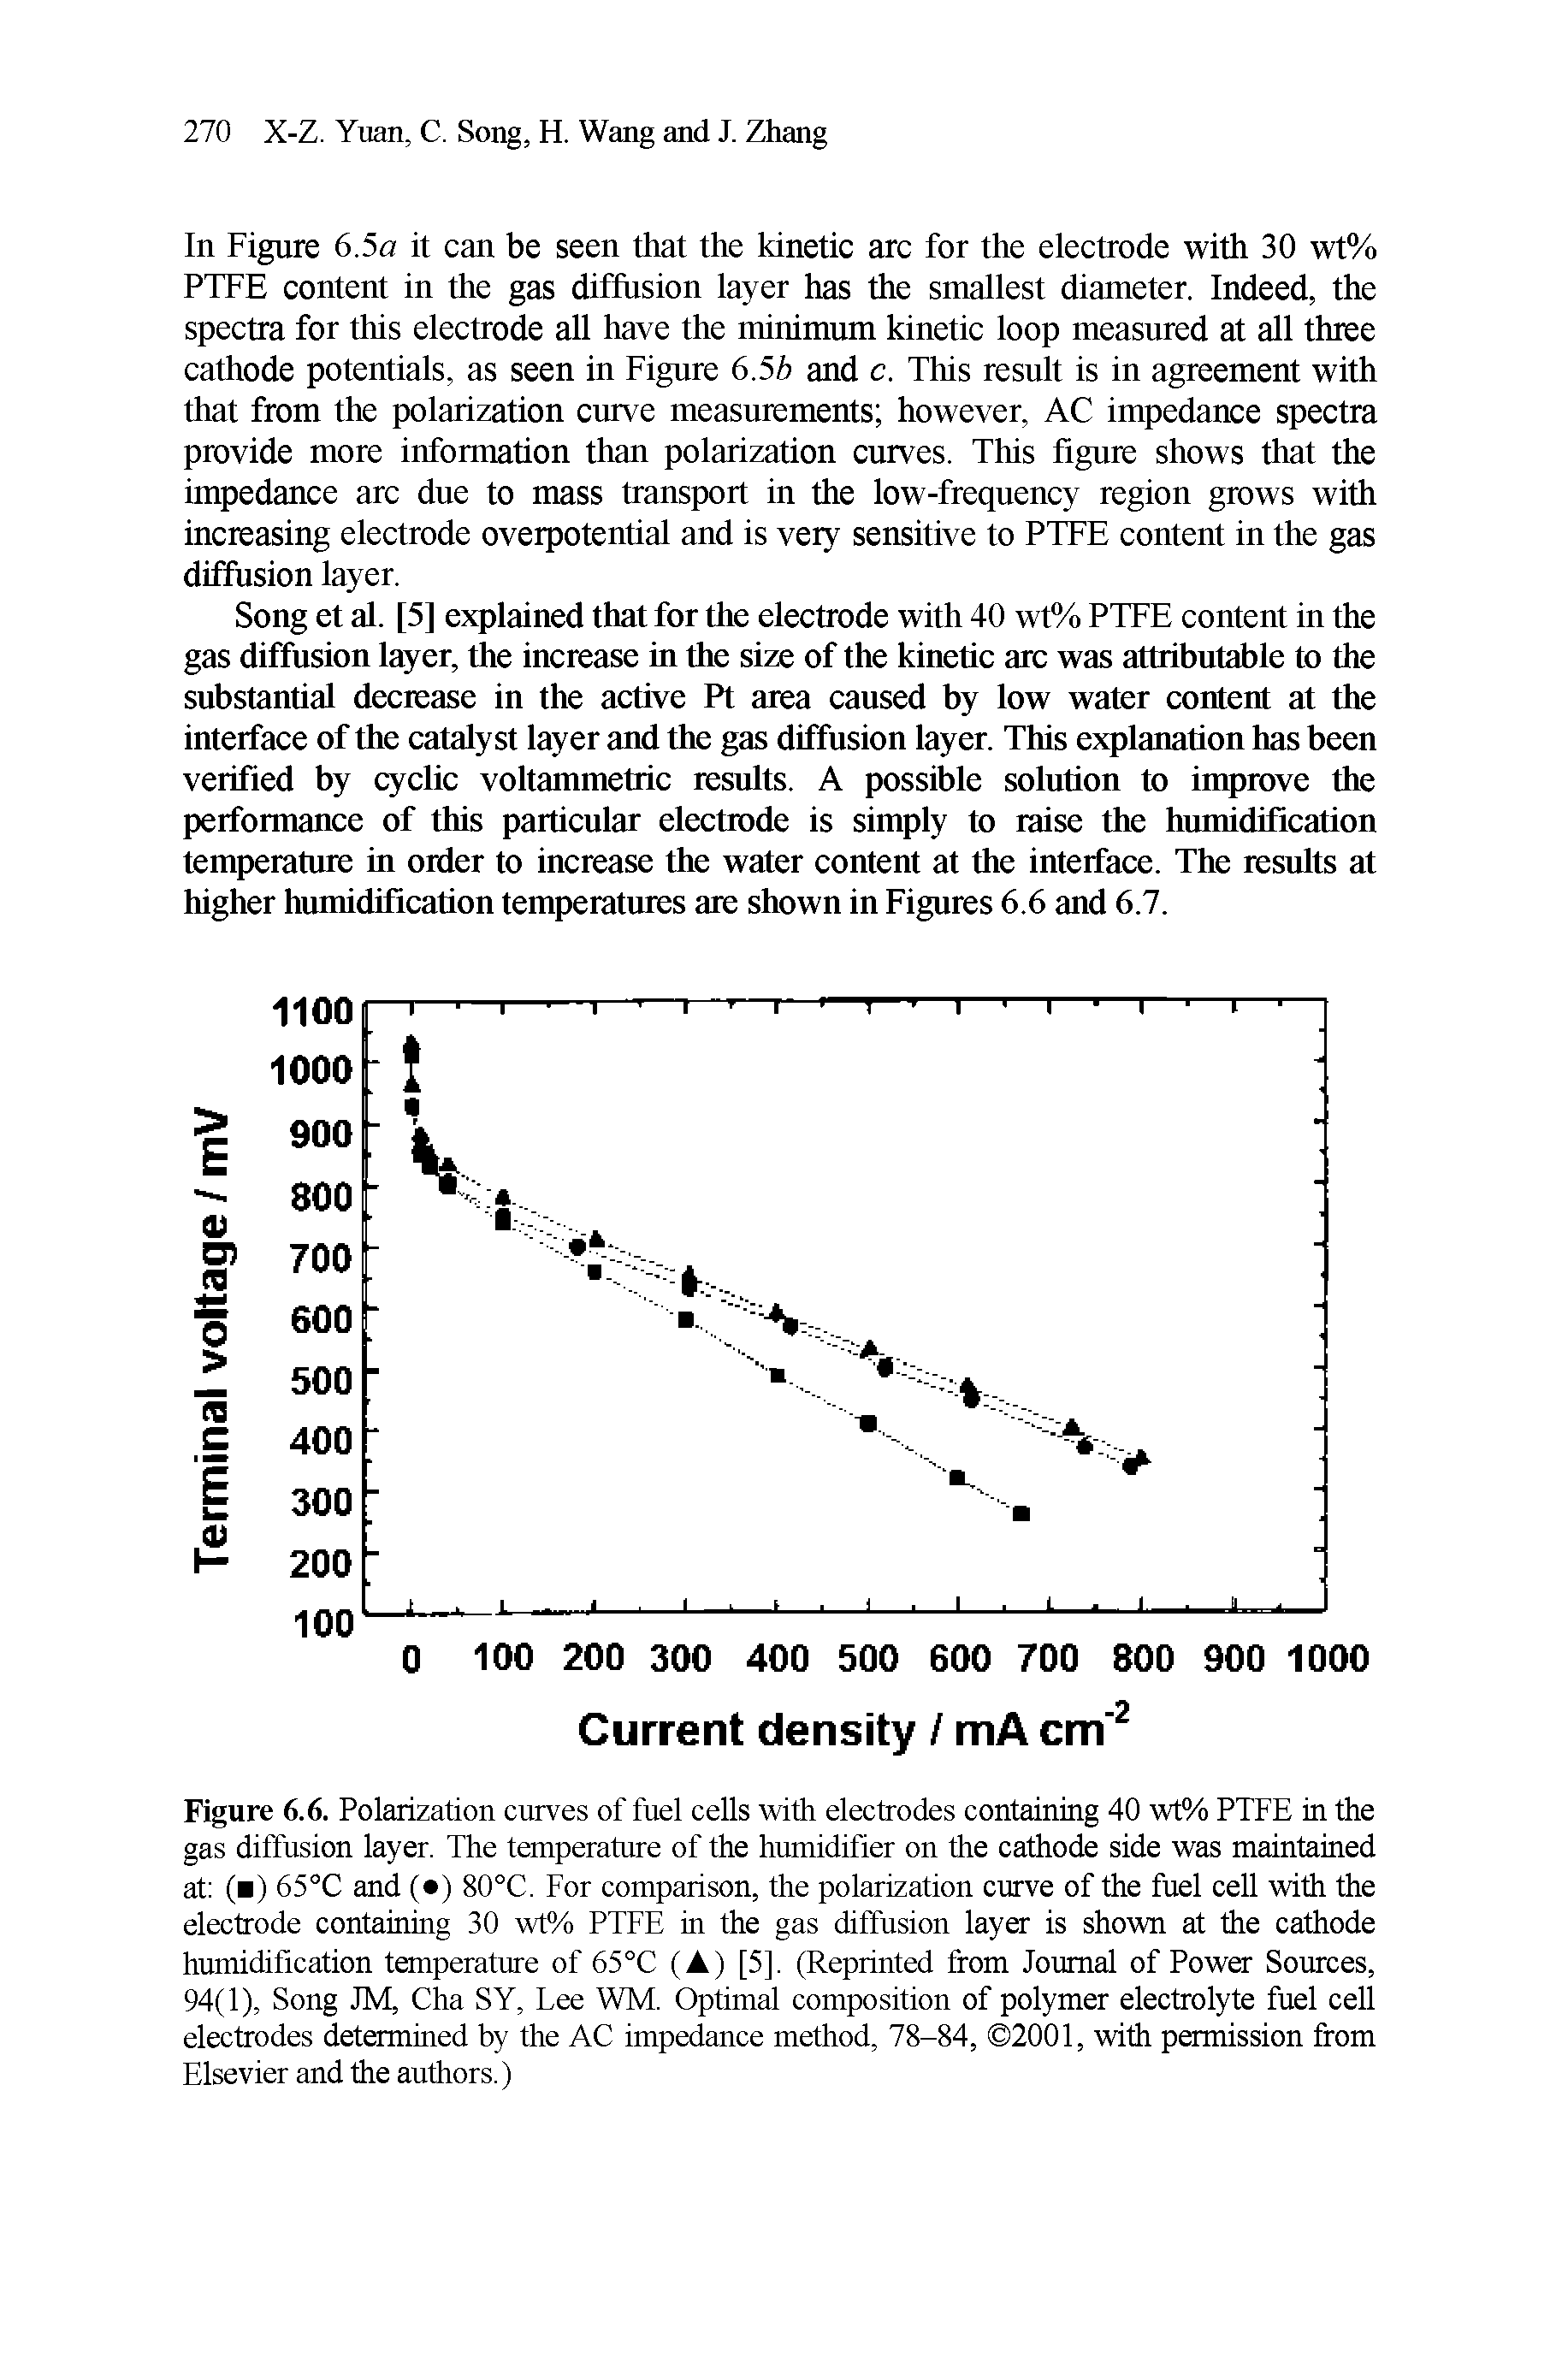 Figure 6.6. Polarization curves of fuel cells with electrodes containing 40 wt% PTFE in the gas diffusion layer. The temperature of the humidifier on the cathode side was maintained at ( ) 65°C and ( ) 80°C. For comparison, the polarization curve of the fuel cell with the electrode containing 30 wt% PTFE in the gas diffusion layer is shown at the cathode humidification temperature of 65°C (A) [5], (Reprinted from Journal of Power Sources, 94(1), Song JM, Cha SY, Lee WM. Optimal composition of polymer electrolyte fuel cell electrodes determined by the AC impedance method, 78-84, 2001, with permission from Elsevier and the authors.)...